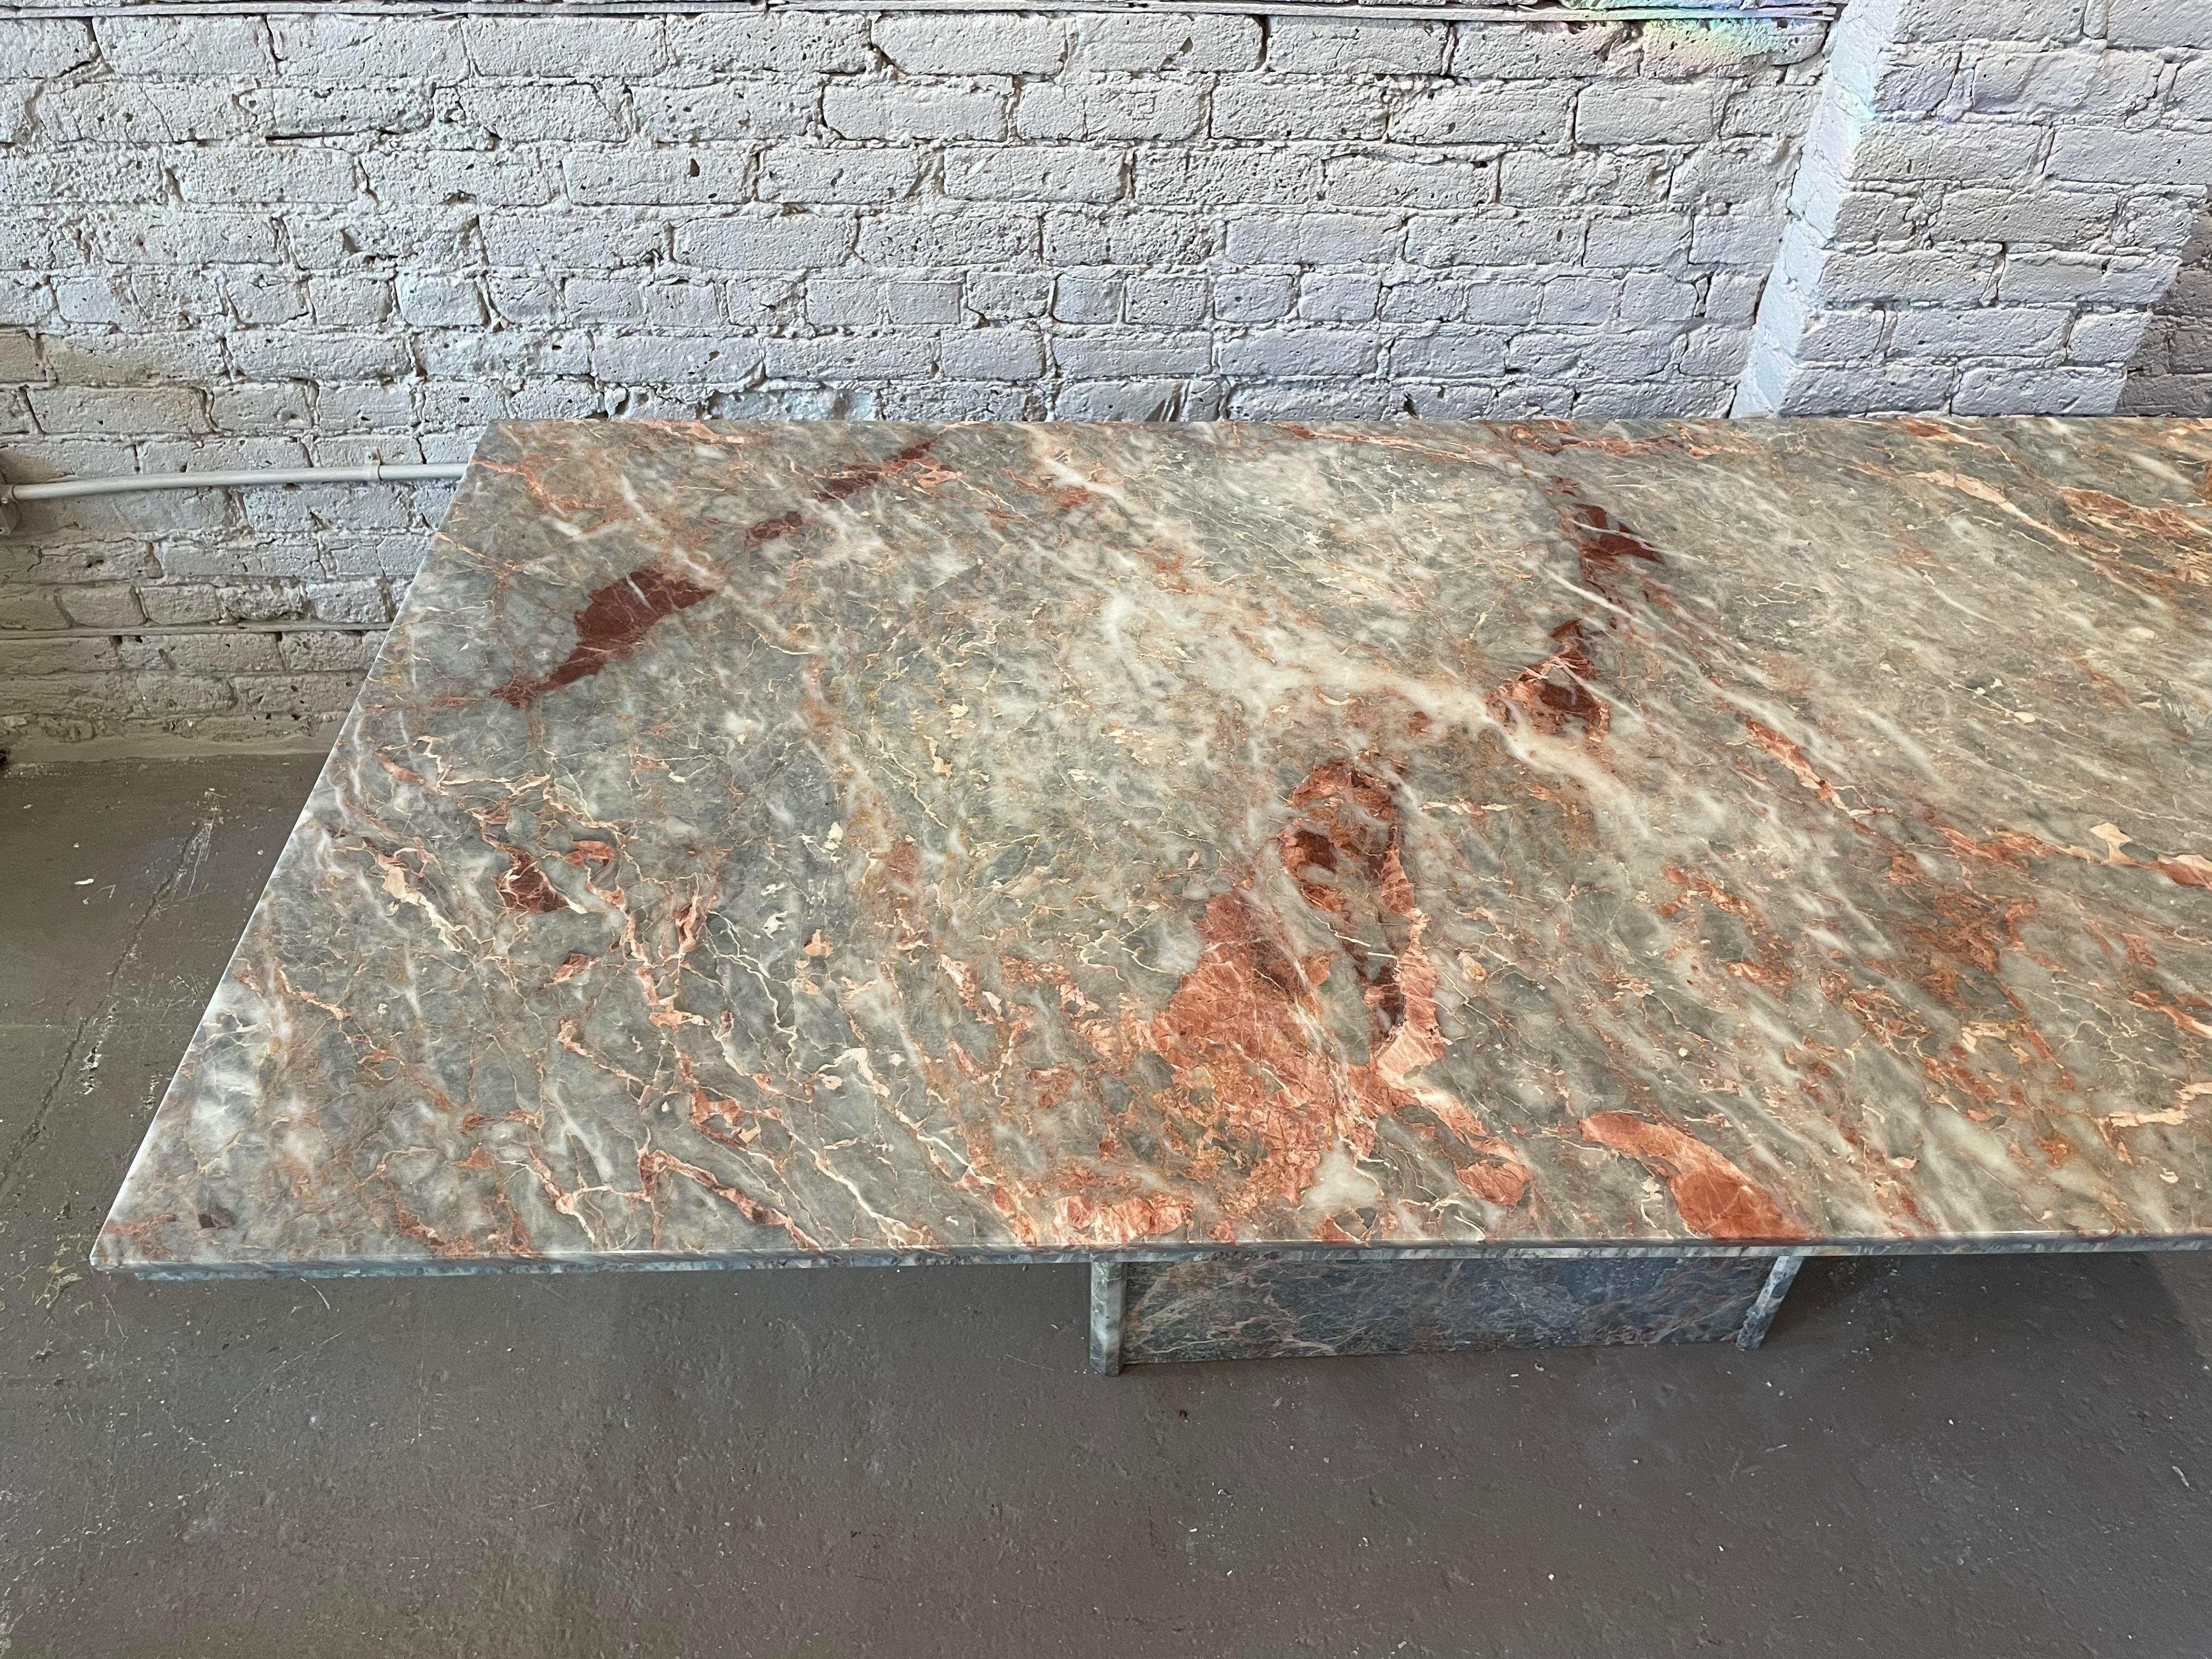 A classical marble with a muted, tonal palette of soft grey with tints of rose and teal, strongly accented by stunning veins in pearl white, blush, raisin, and the rich peach that give this stone its name.

Original lacquer finish makes this table